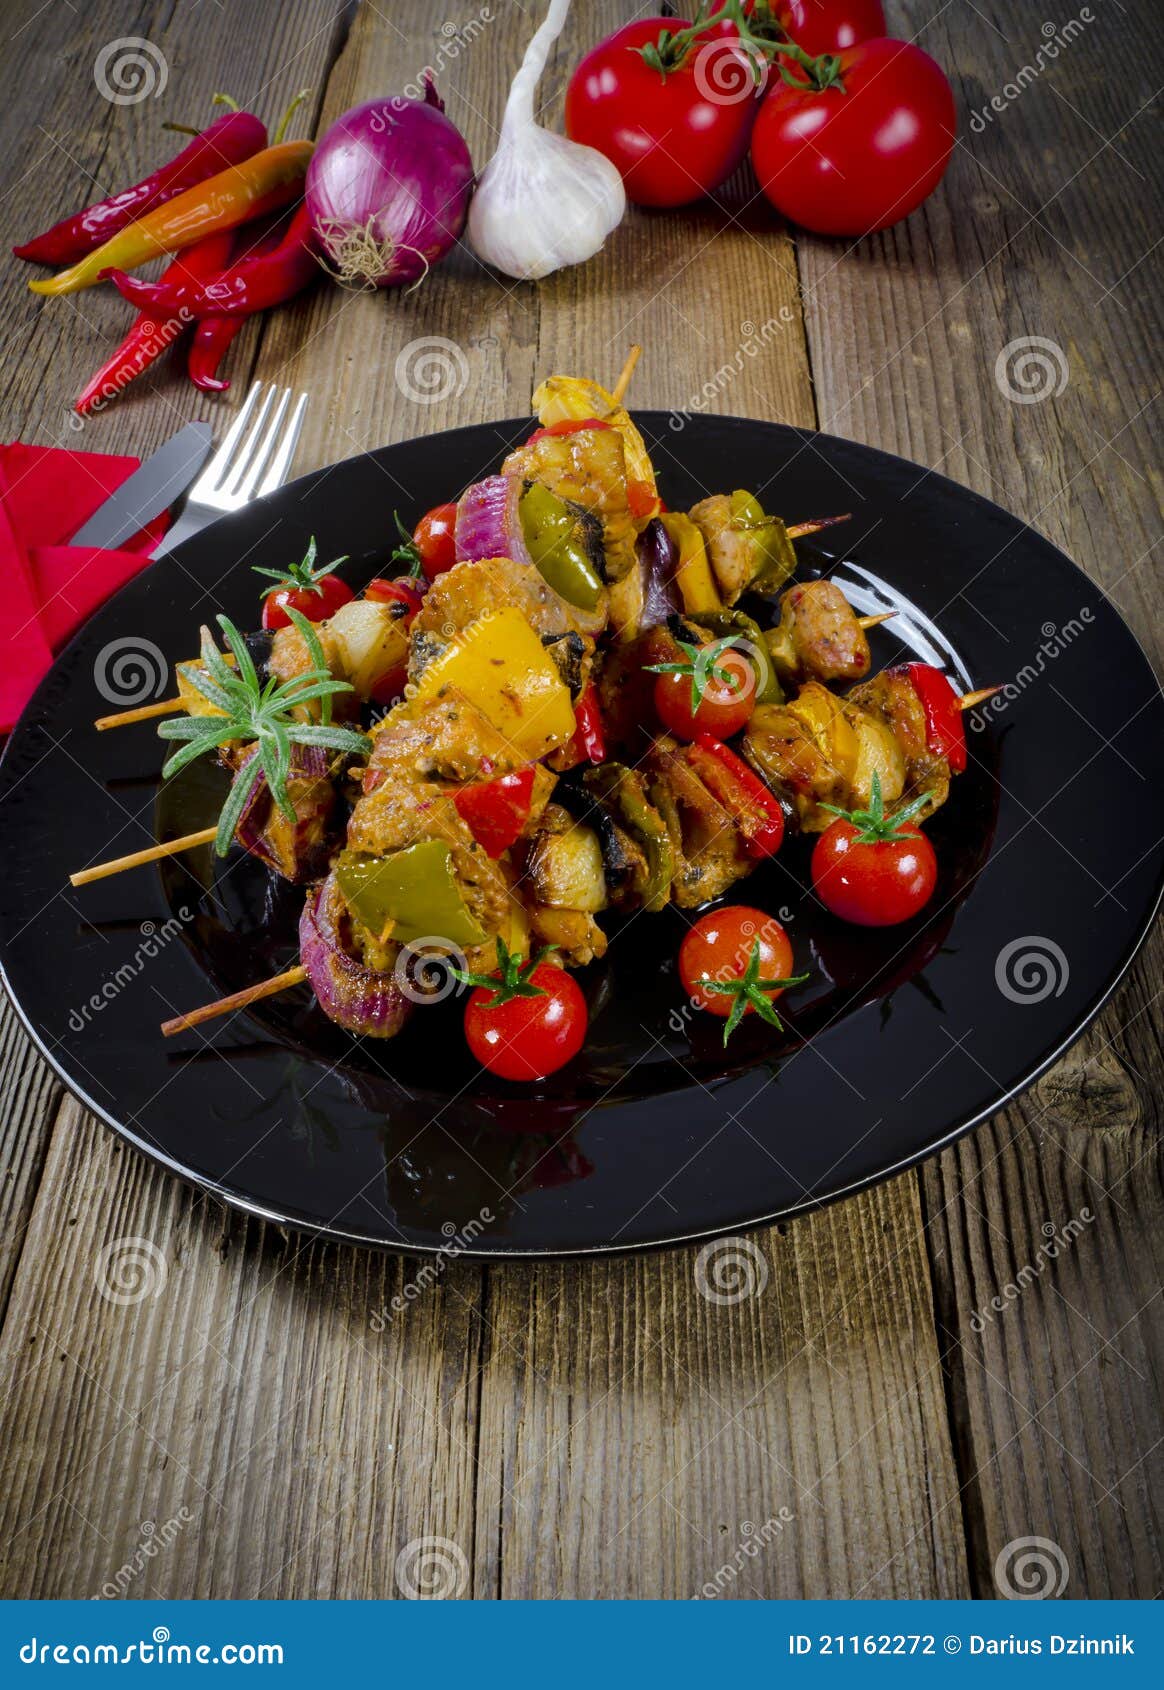 Meat spits stock photo. Image of dish, animal, barbecue - 21162272